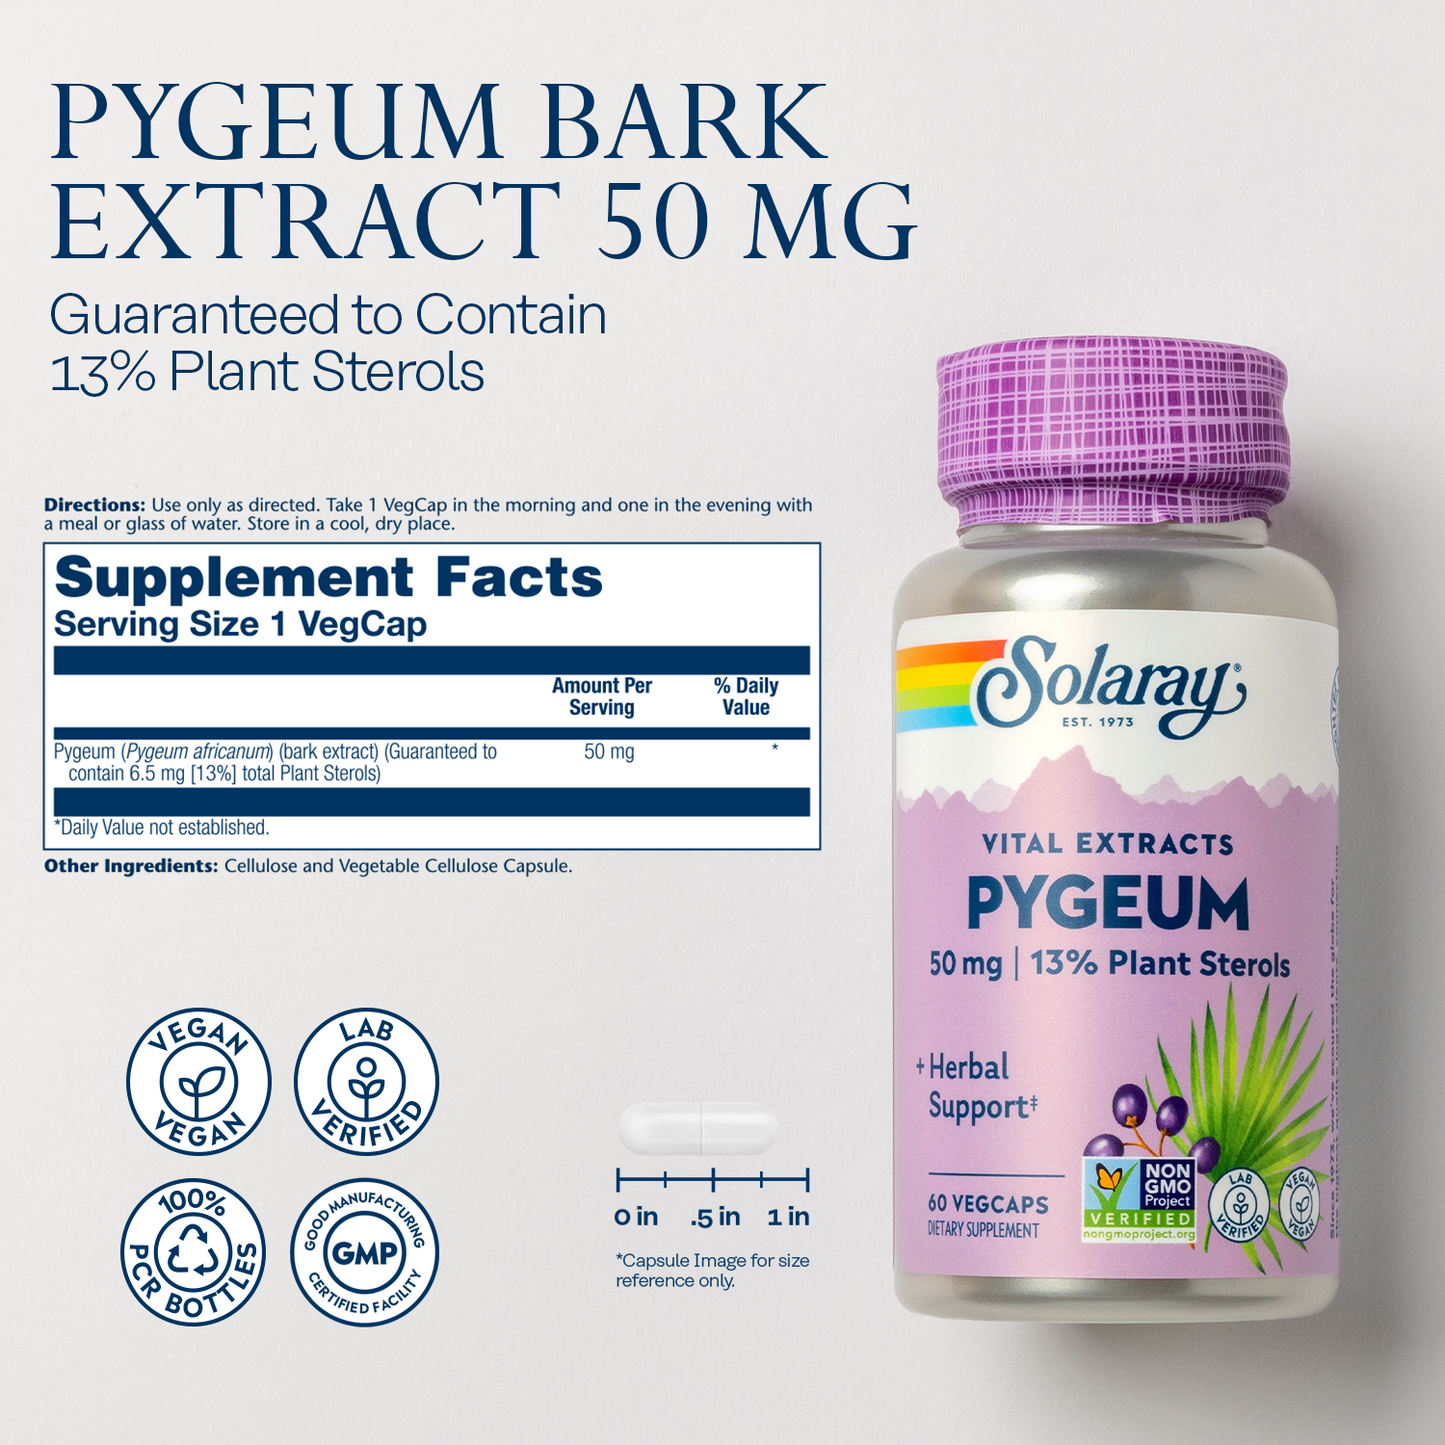 Solaray Pygeum Bark Extract 50mg Healthy Prostate Support Guaranteed to Contain 6.5mg Total Plant Sterols Non-GMO 60 VegCaps